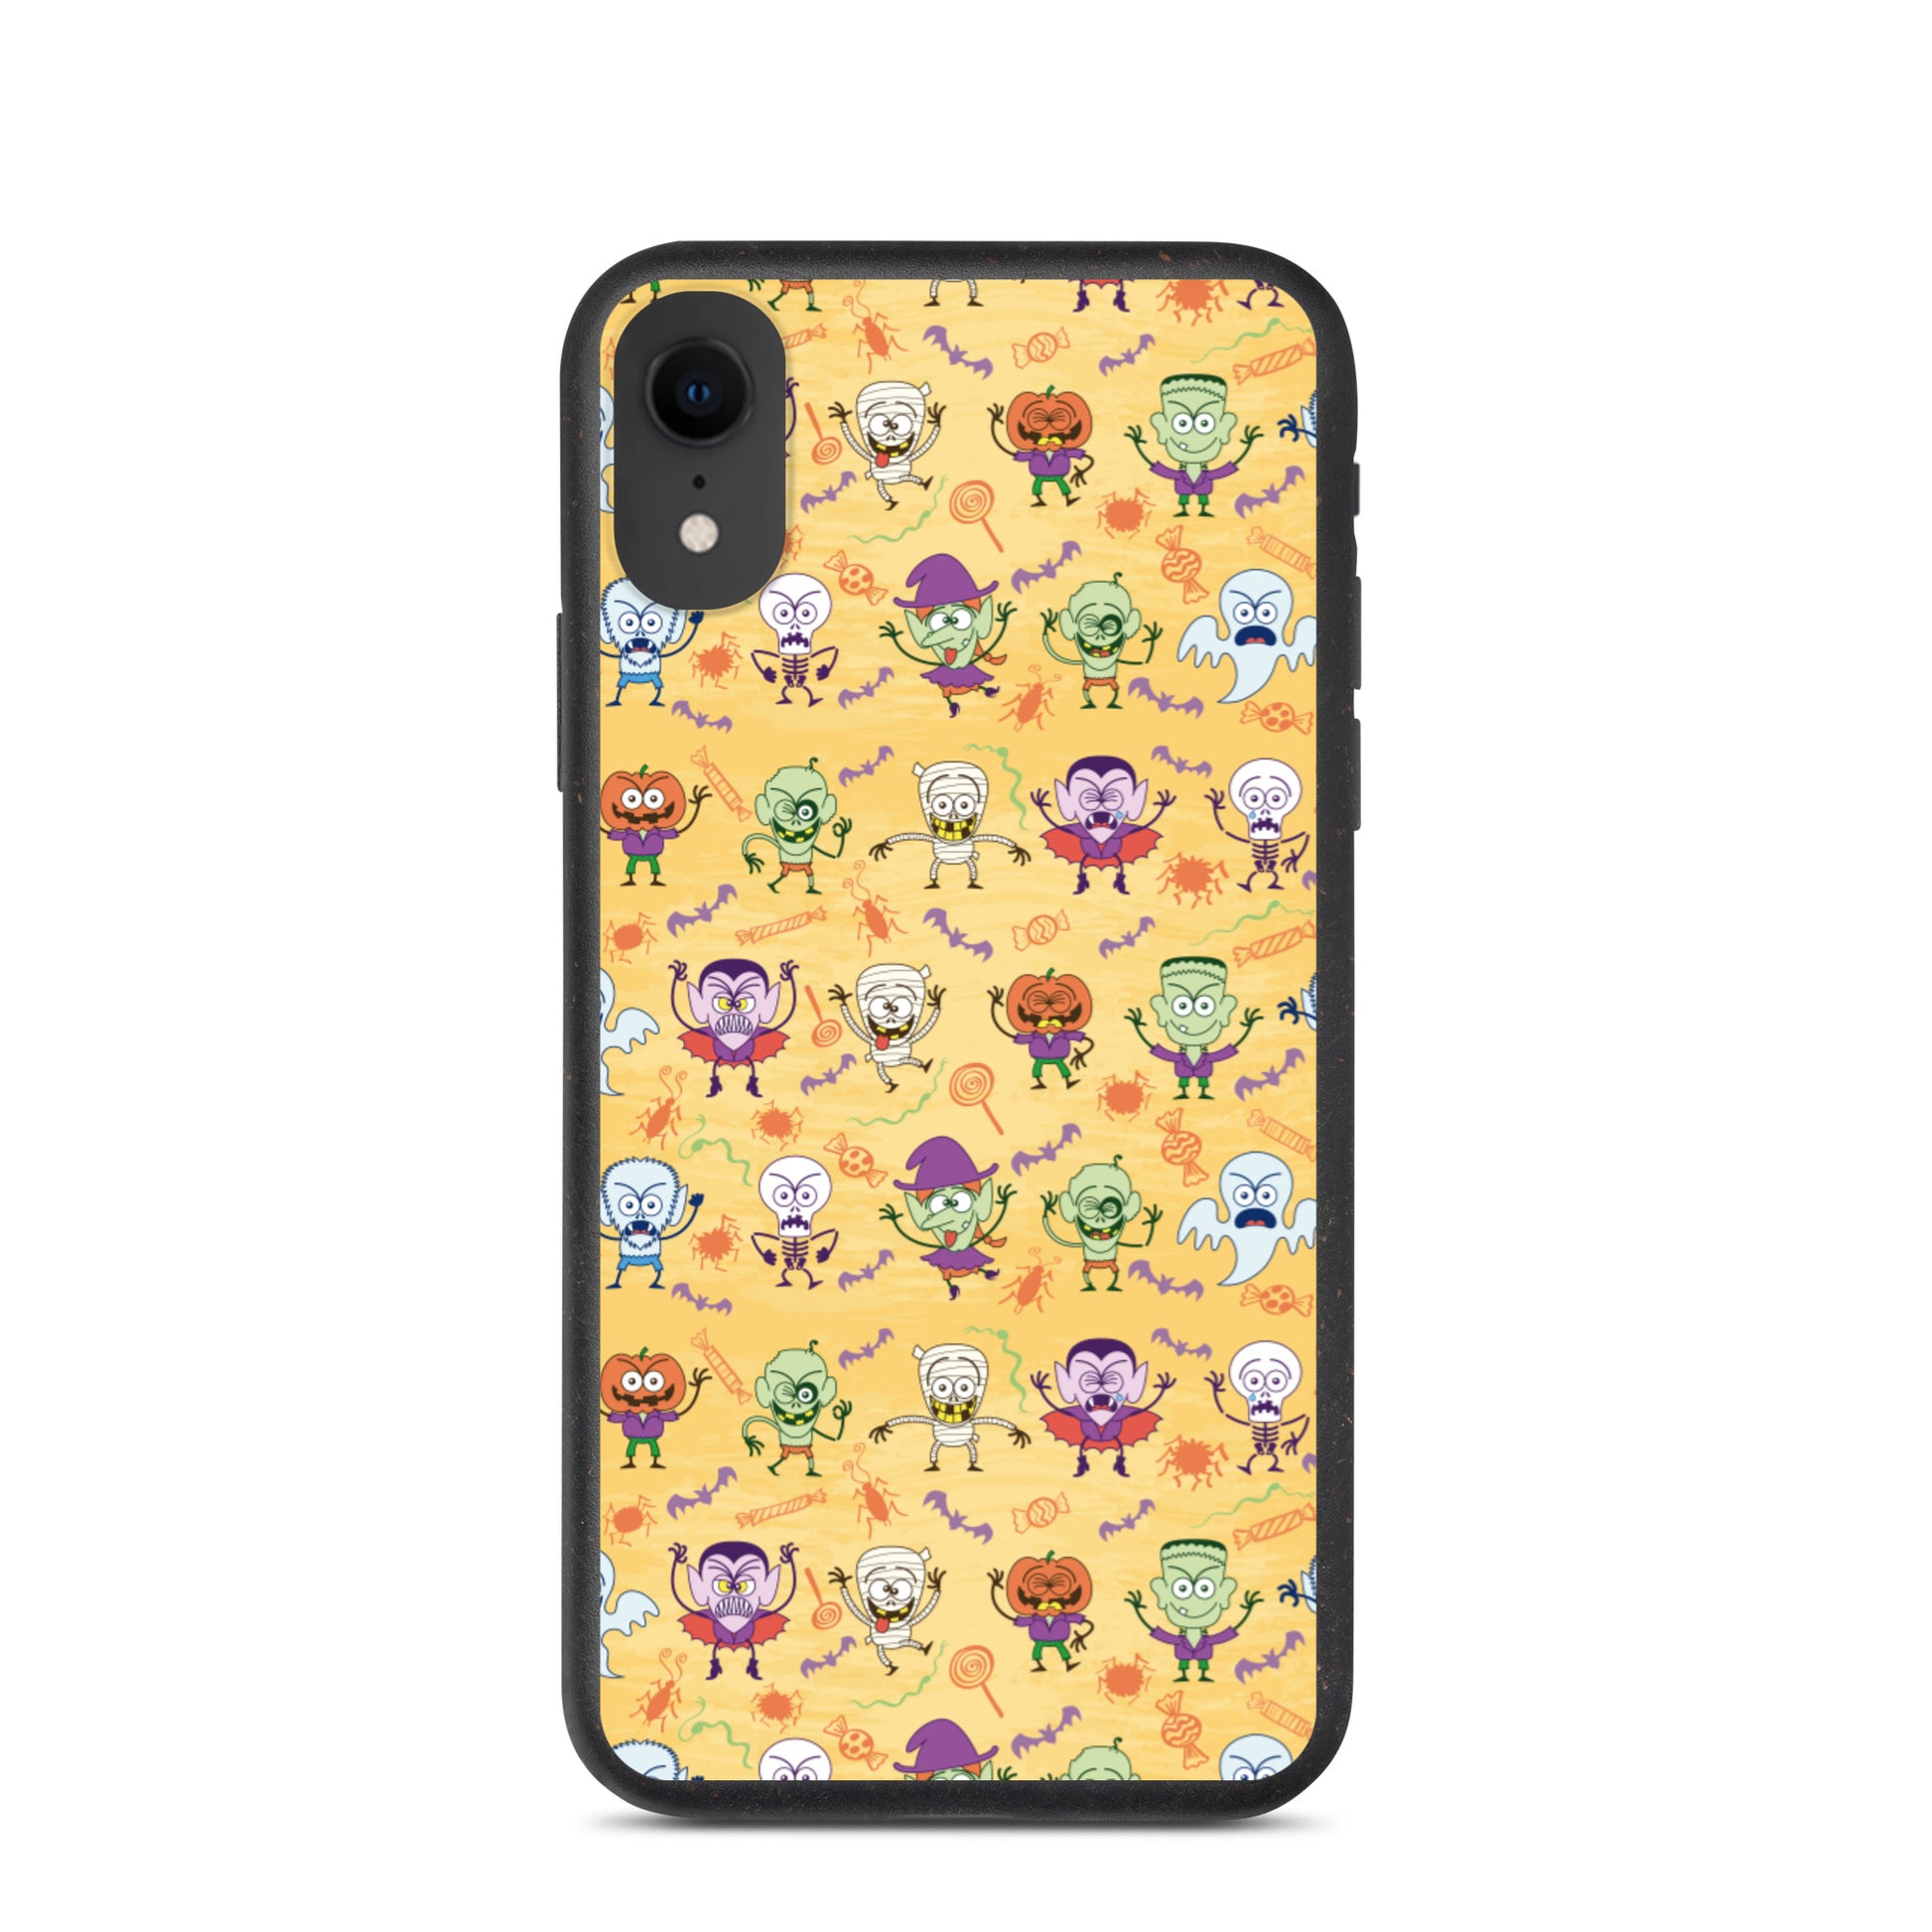 Halloween characters making funny faces Speckled iPhone case. IPhone XR 